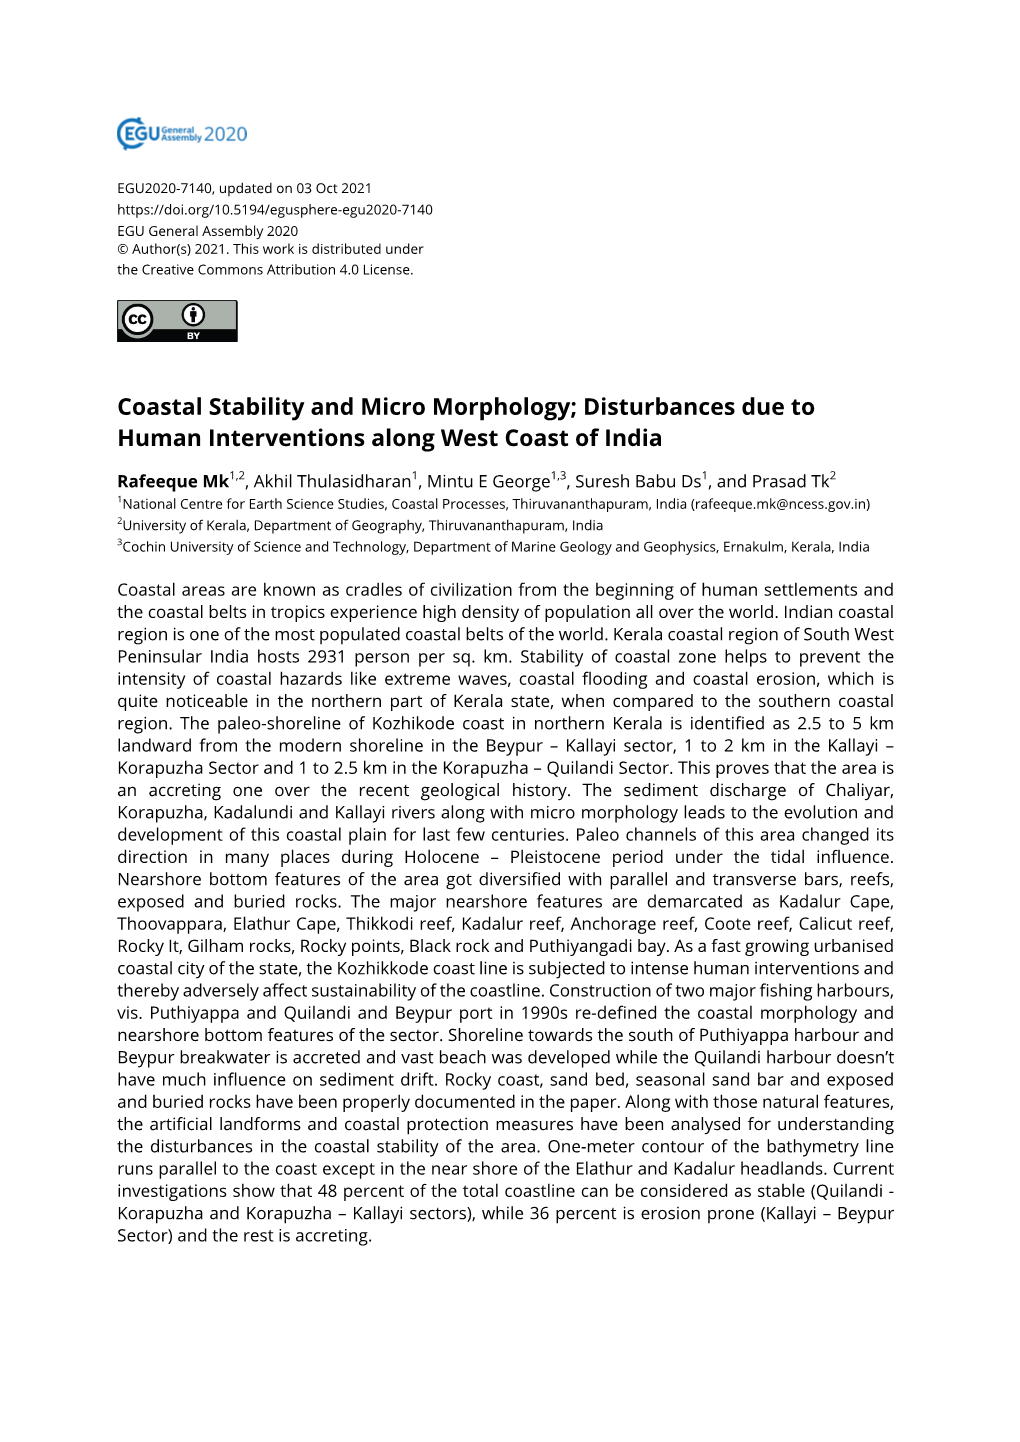 Coastal Stability and Micro Morphology; Disturbances Due to Human Interventions Along West Coast of India